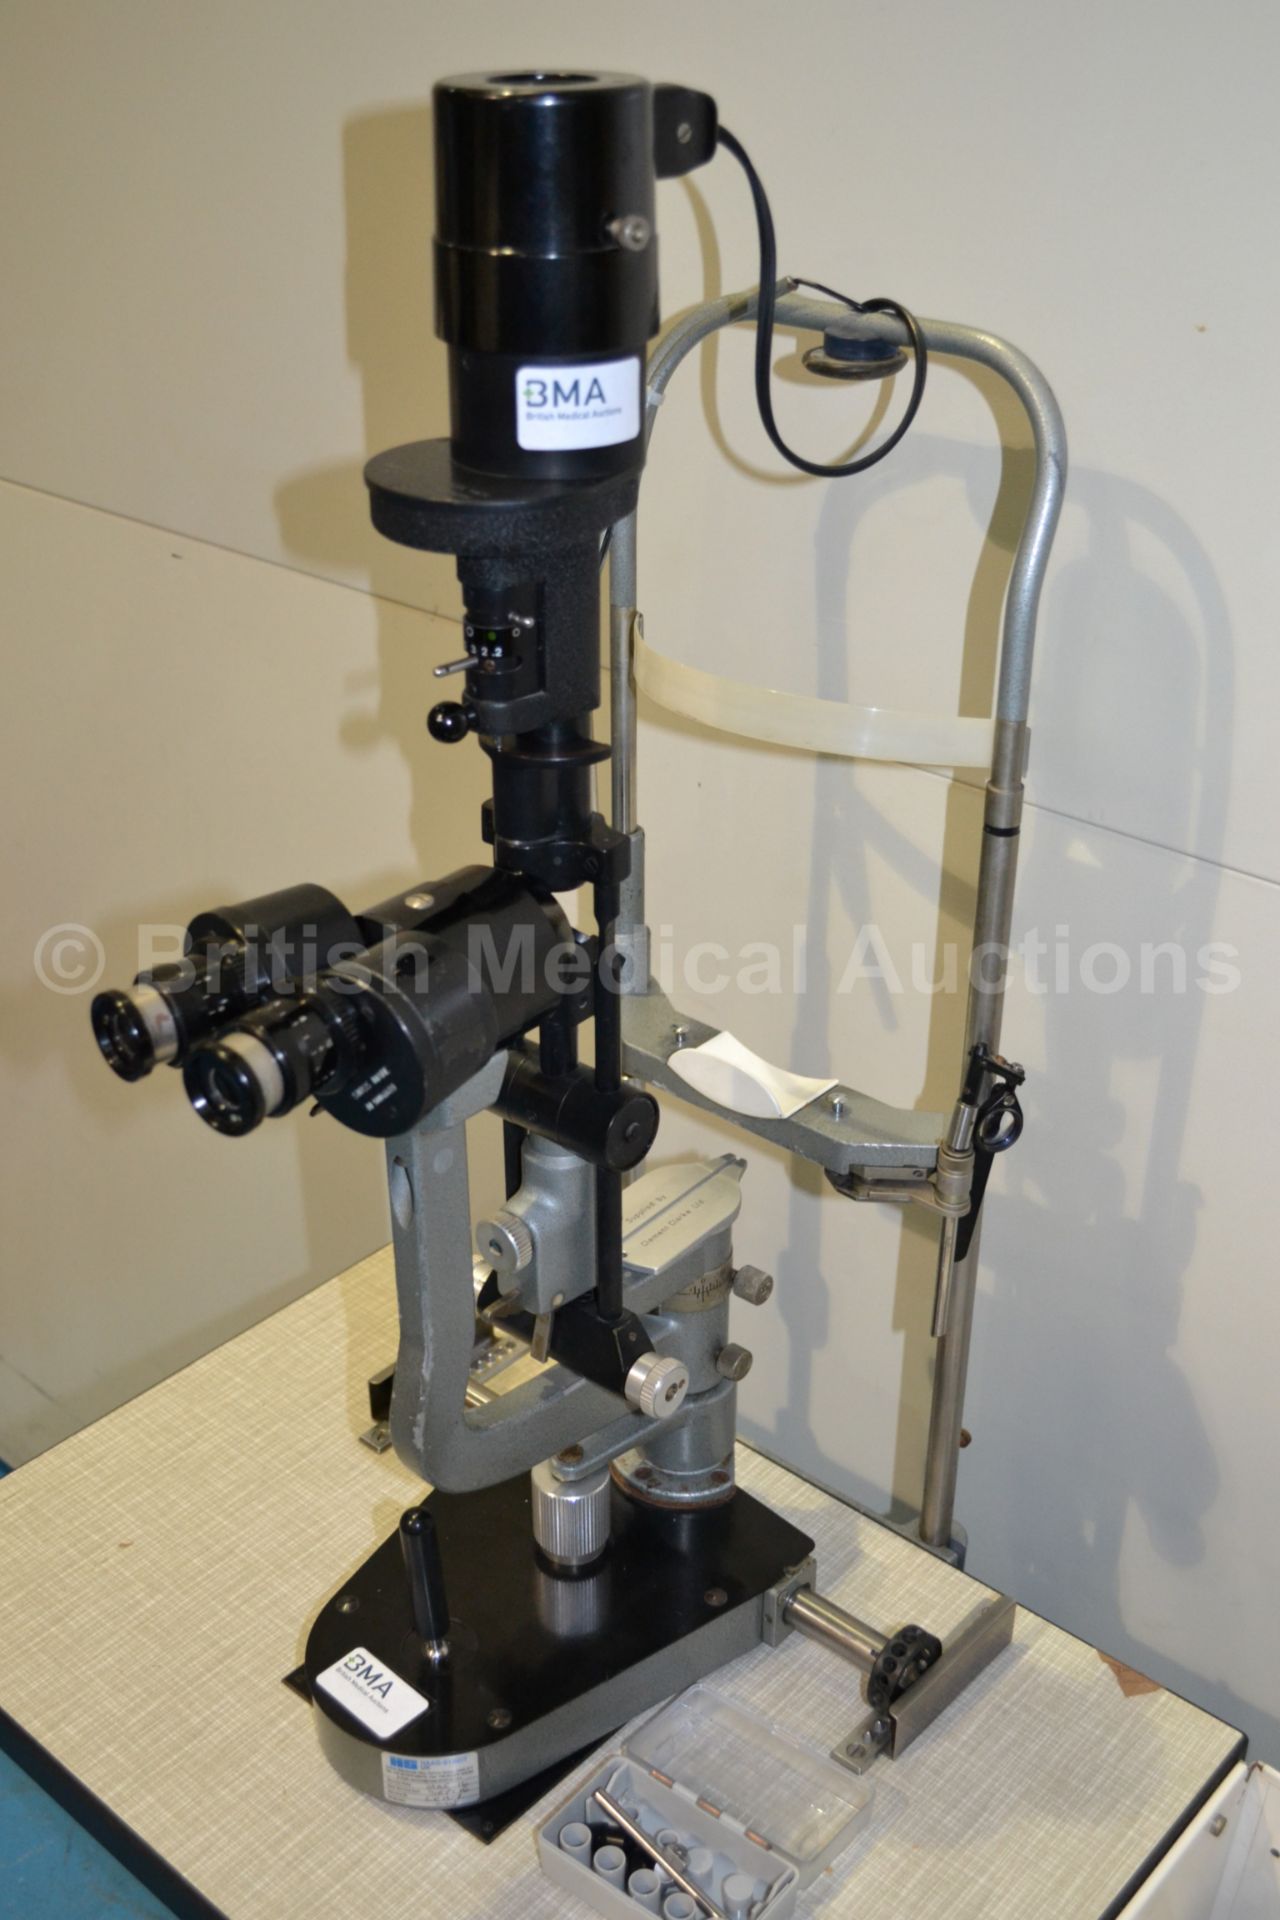 Haag Streit Slit Lamp 900 - Untested Due to Cut Pl - Image 5 of 5